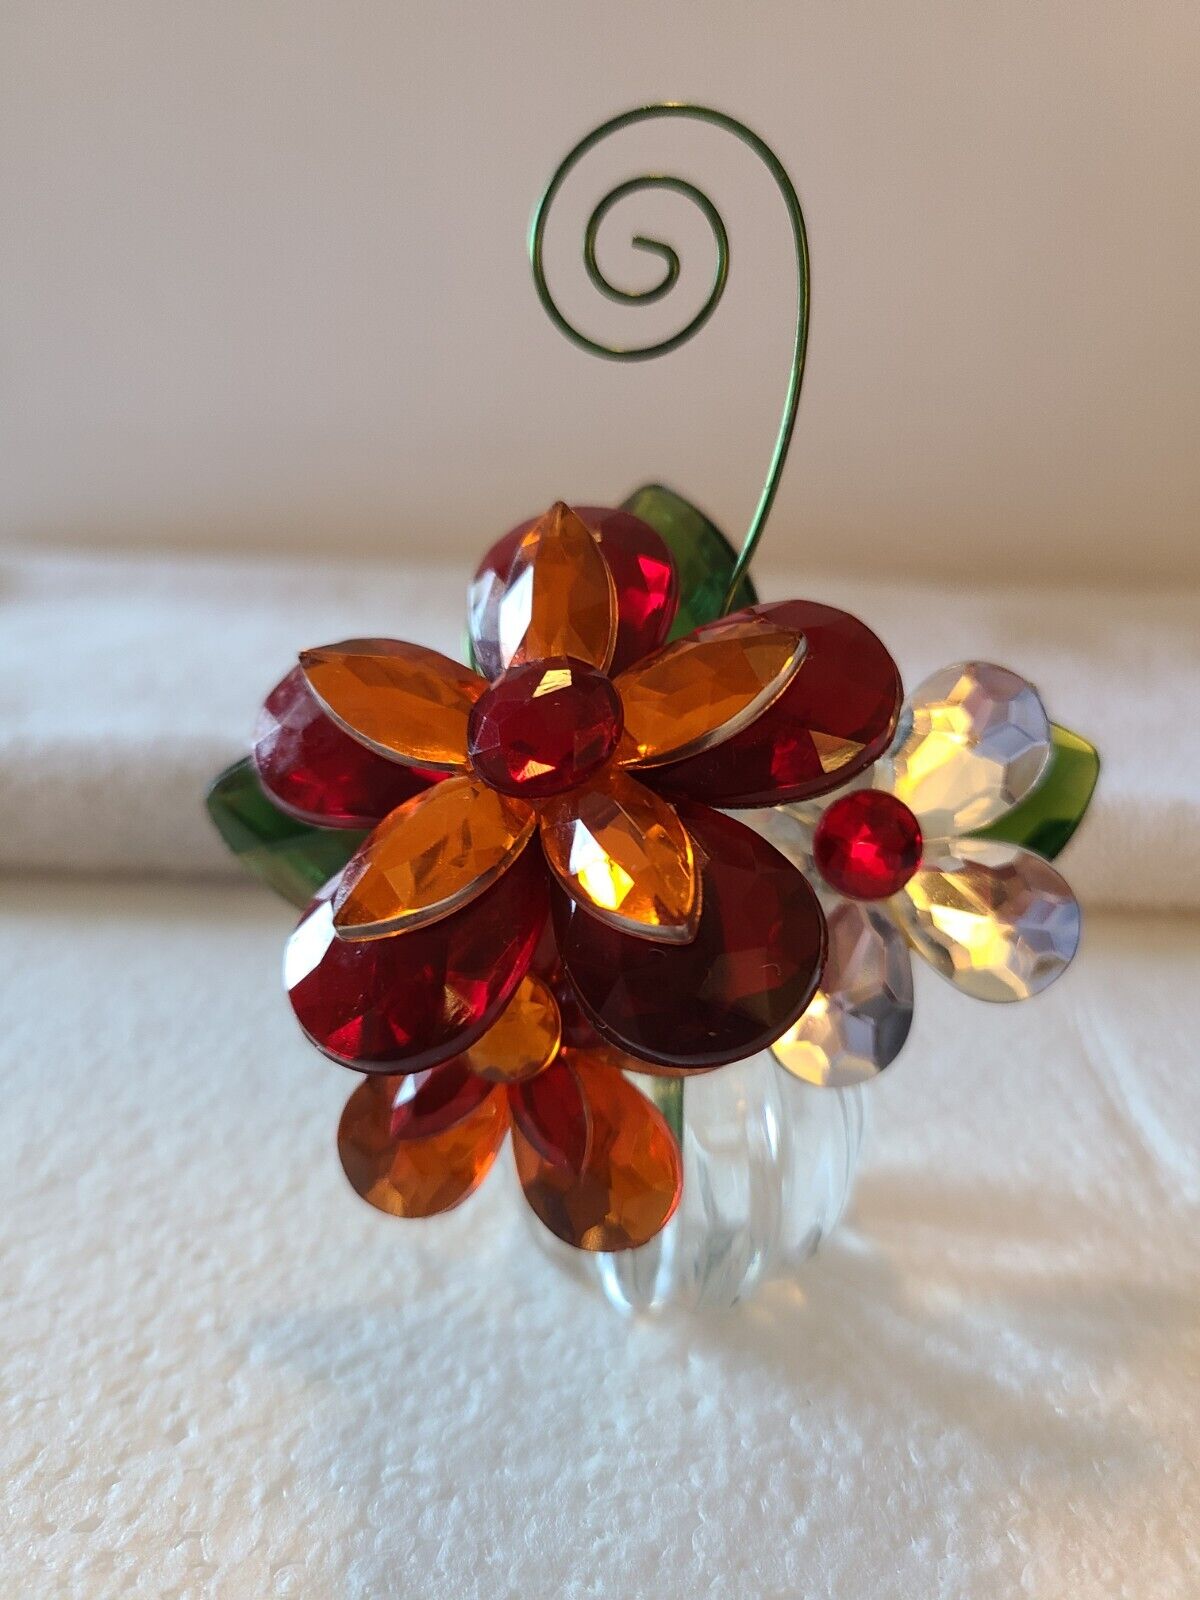 GANZ CRYSTAL EXPRESSIONS POTTED ACRYLIC LUCITE RED ORANGE DAISY FLOWER FIGURINE 